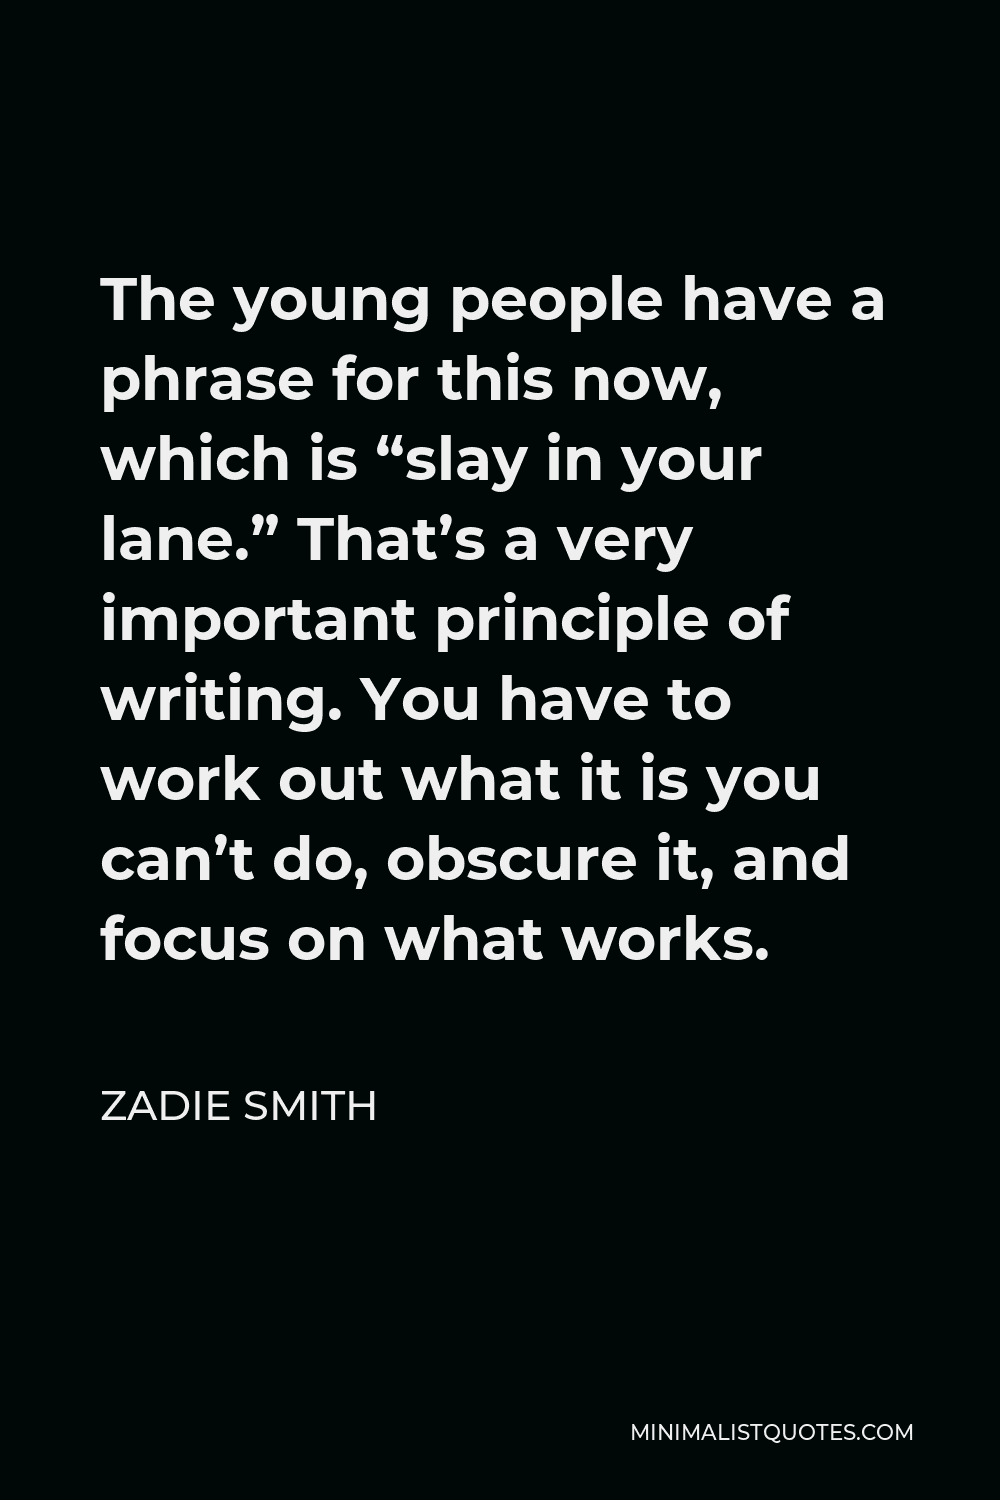 Zadie Smith Quote - The young people have a phrase for this now, which is “slay in your lane.” That’s a very important principle of writing. You have to work out what it is you can’t do, obscure it, and focus on what works.